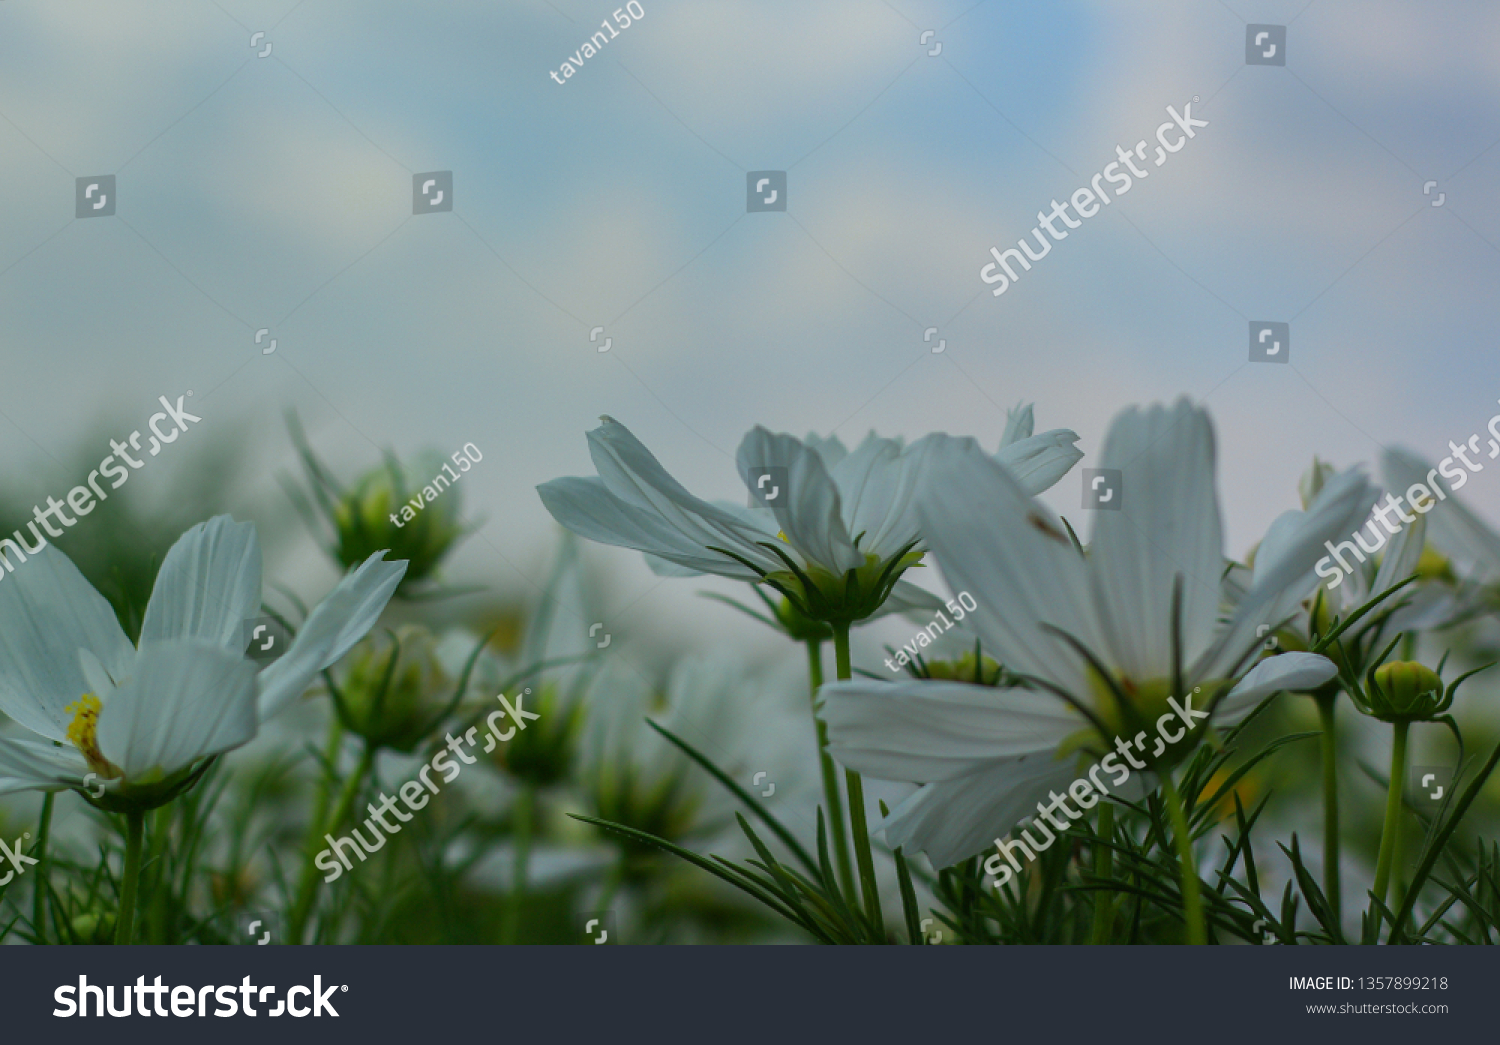 White cosmos flower blooming beautifully for background . One kind of flowering plant that has been called Is the name of a star that is far from the horizon cosmos (starburst) flower means the intent #1357899218